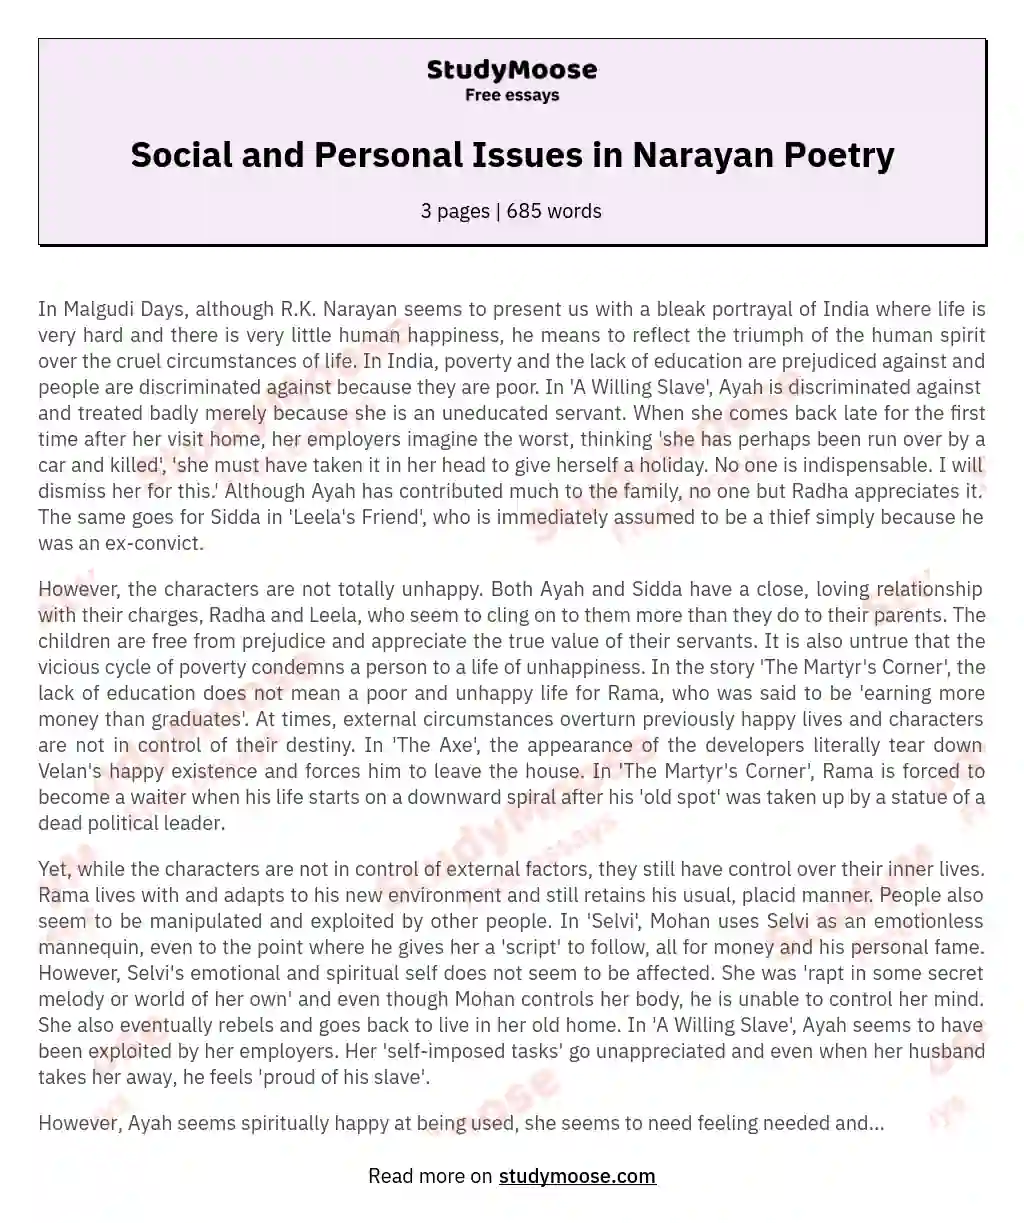 Social and Personal Issues in Narayan Poetry essay